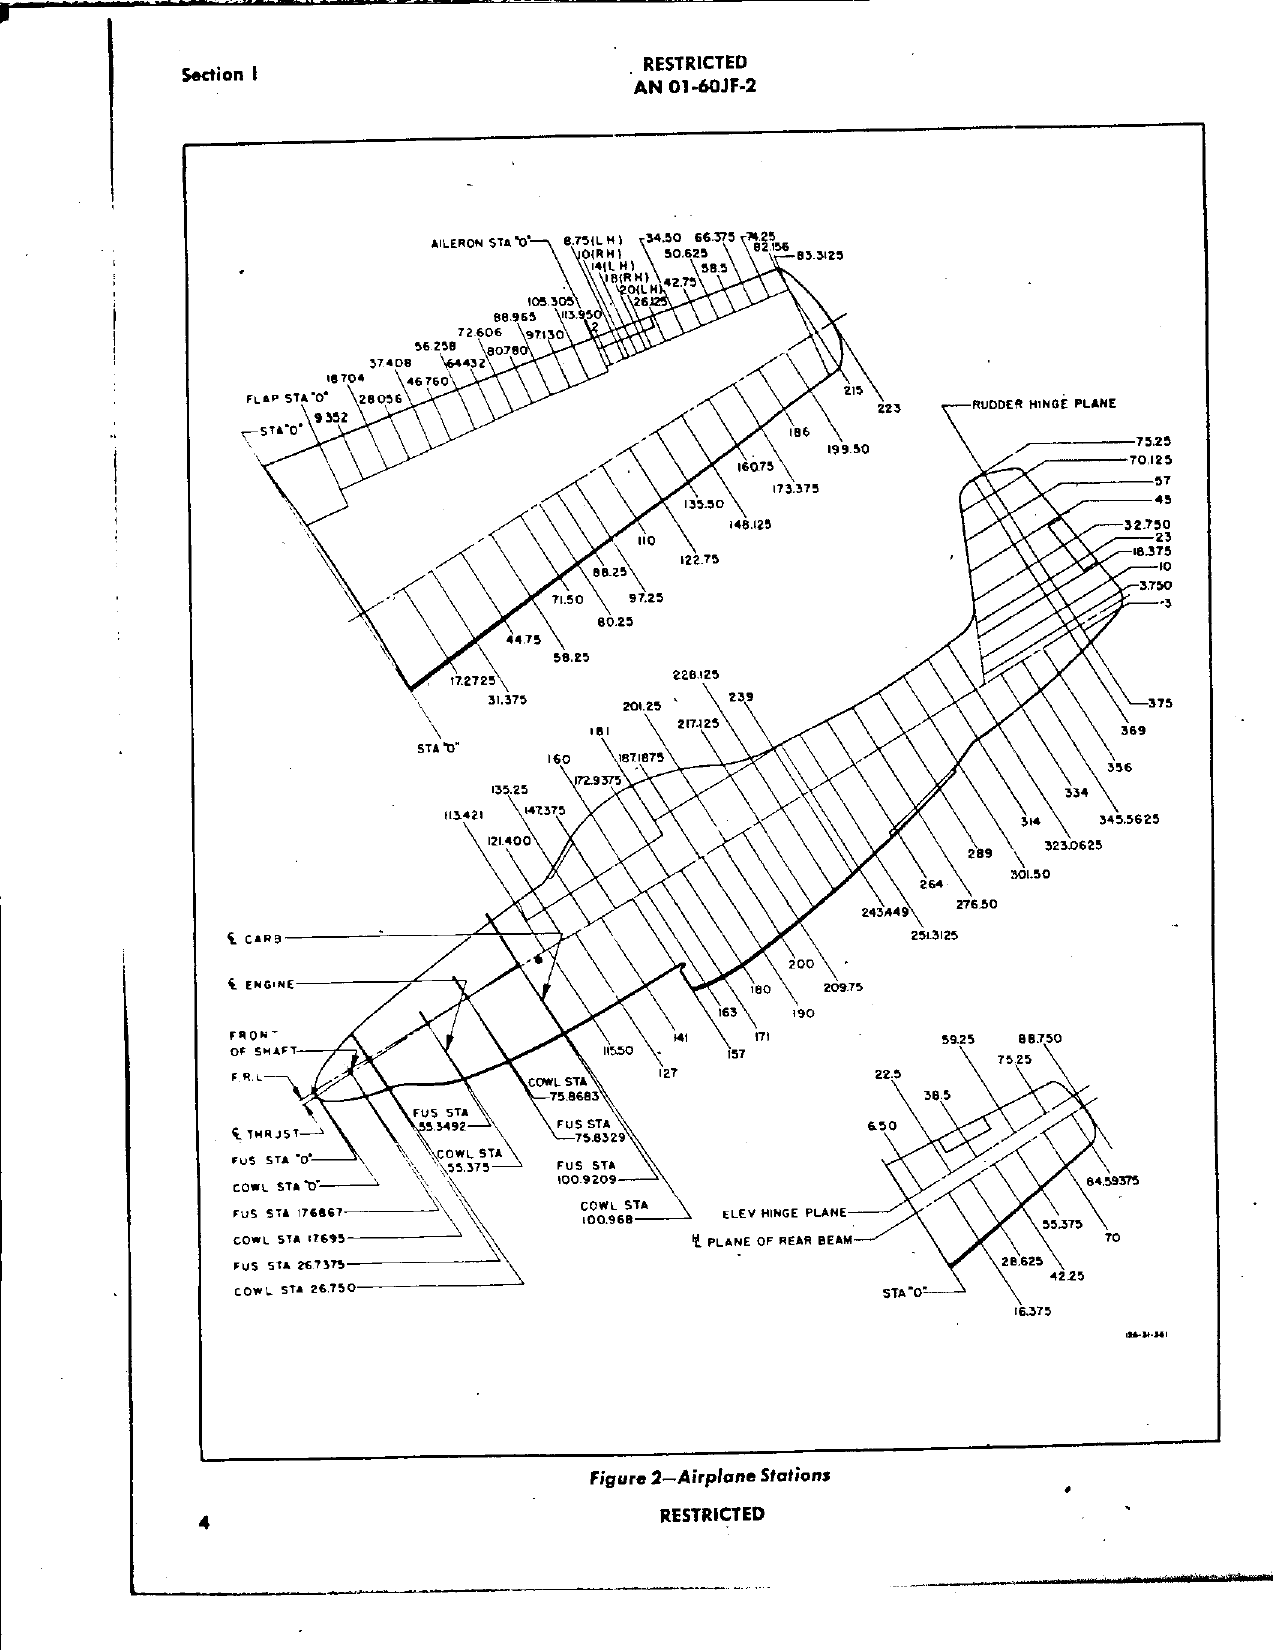 Sample page 8 from AirCorps Library document: Erection and Maintenance Instructions for P-51H Airplane